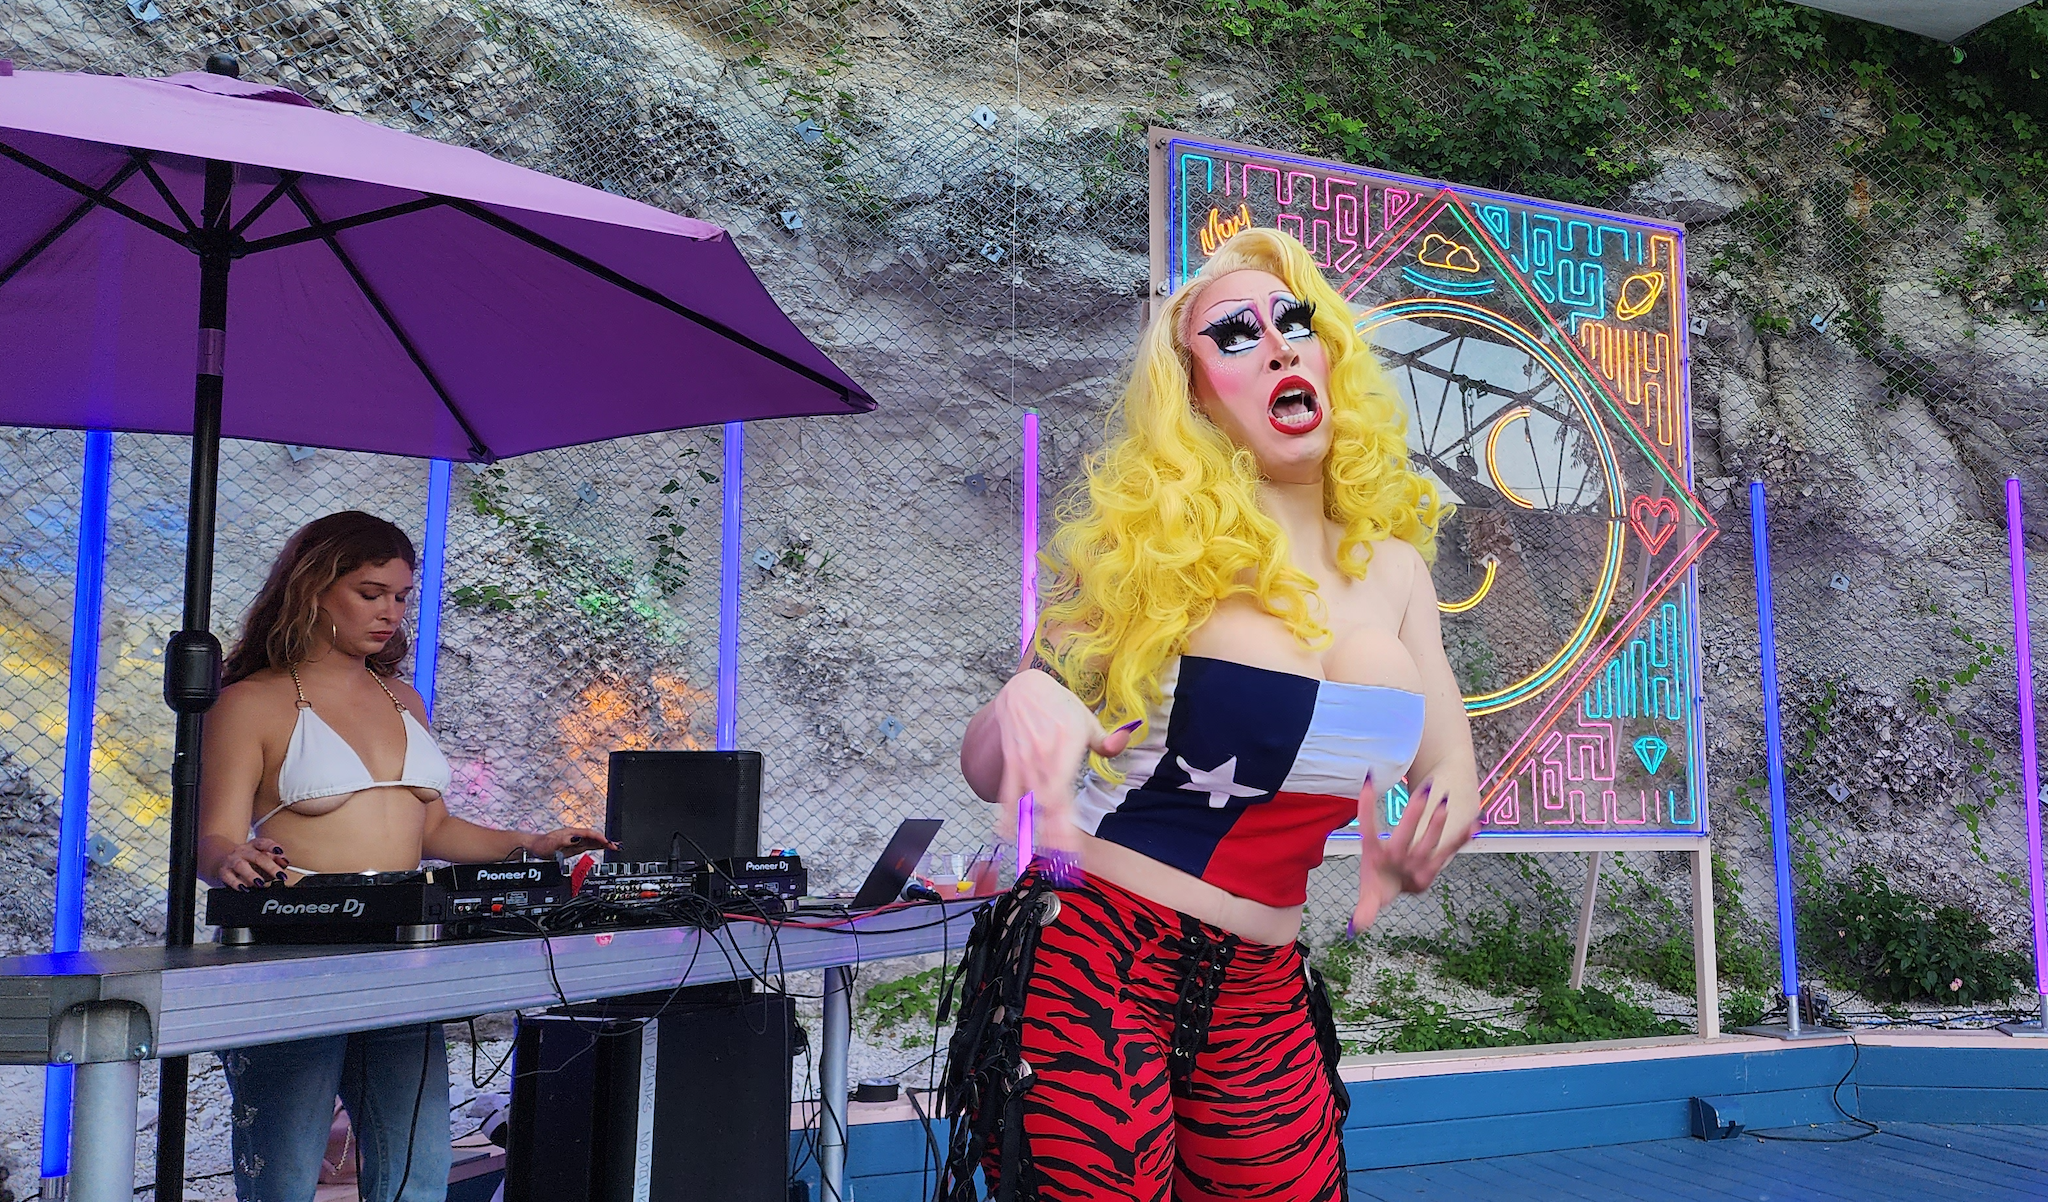 Drag queen Brigitte Bandit performs on an ouitdoor stage in a sleeveless Texas flag halter top over large prosthetic breasts, a bright yellow blonde wig, and red and black tiger-stripe side-tie cowboy pants.